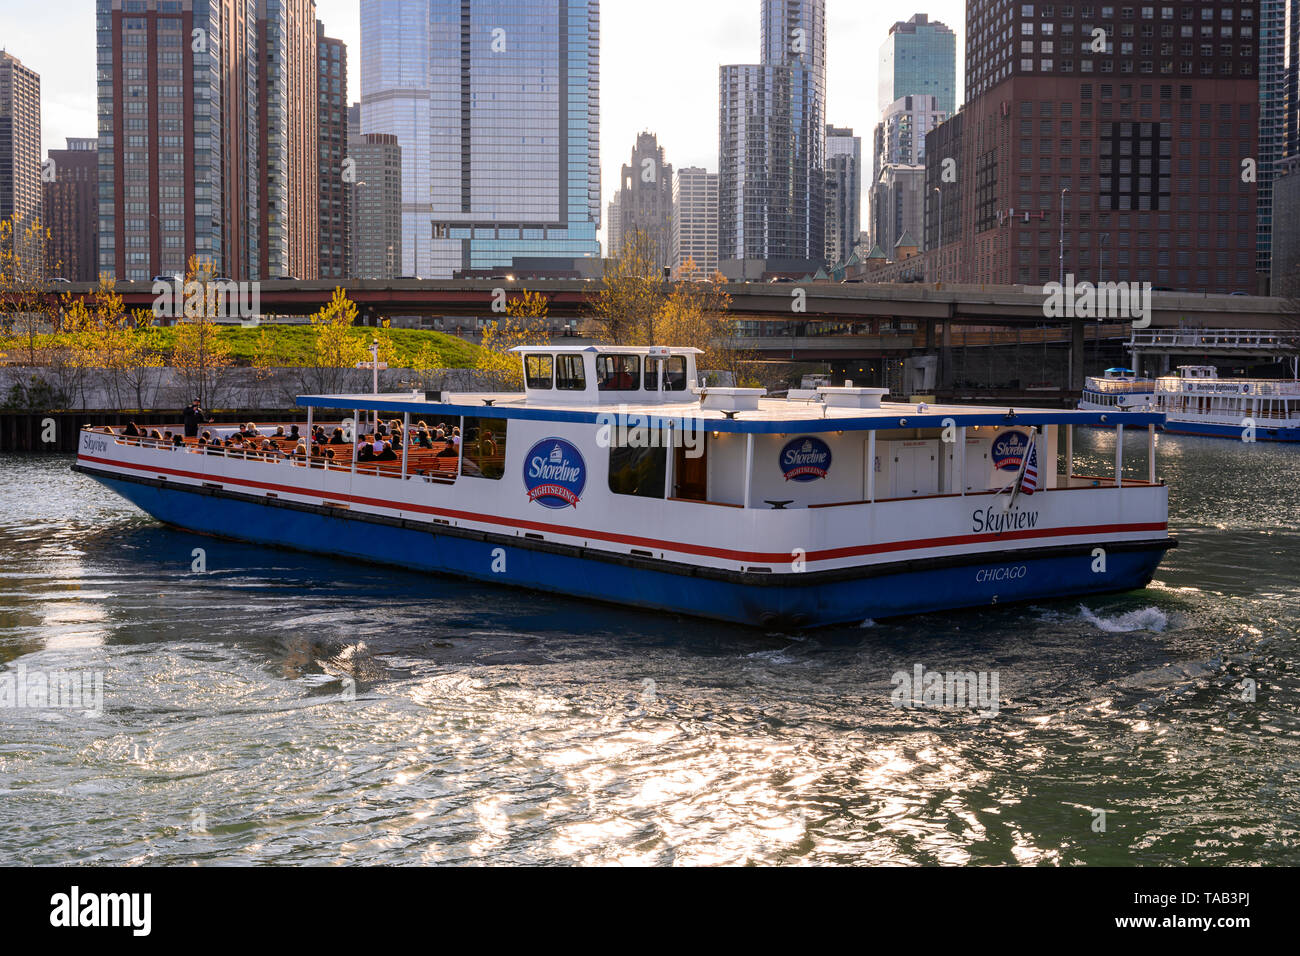 Chicago, IL, United States - May 9, 2019: Shoreline Sightseeing "Skyview" tour boat turning around near the Ogden Slip in Chicago. Stock Photo